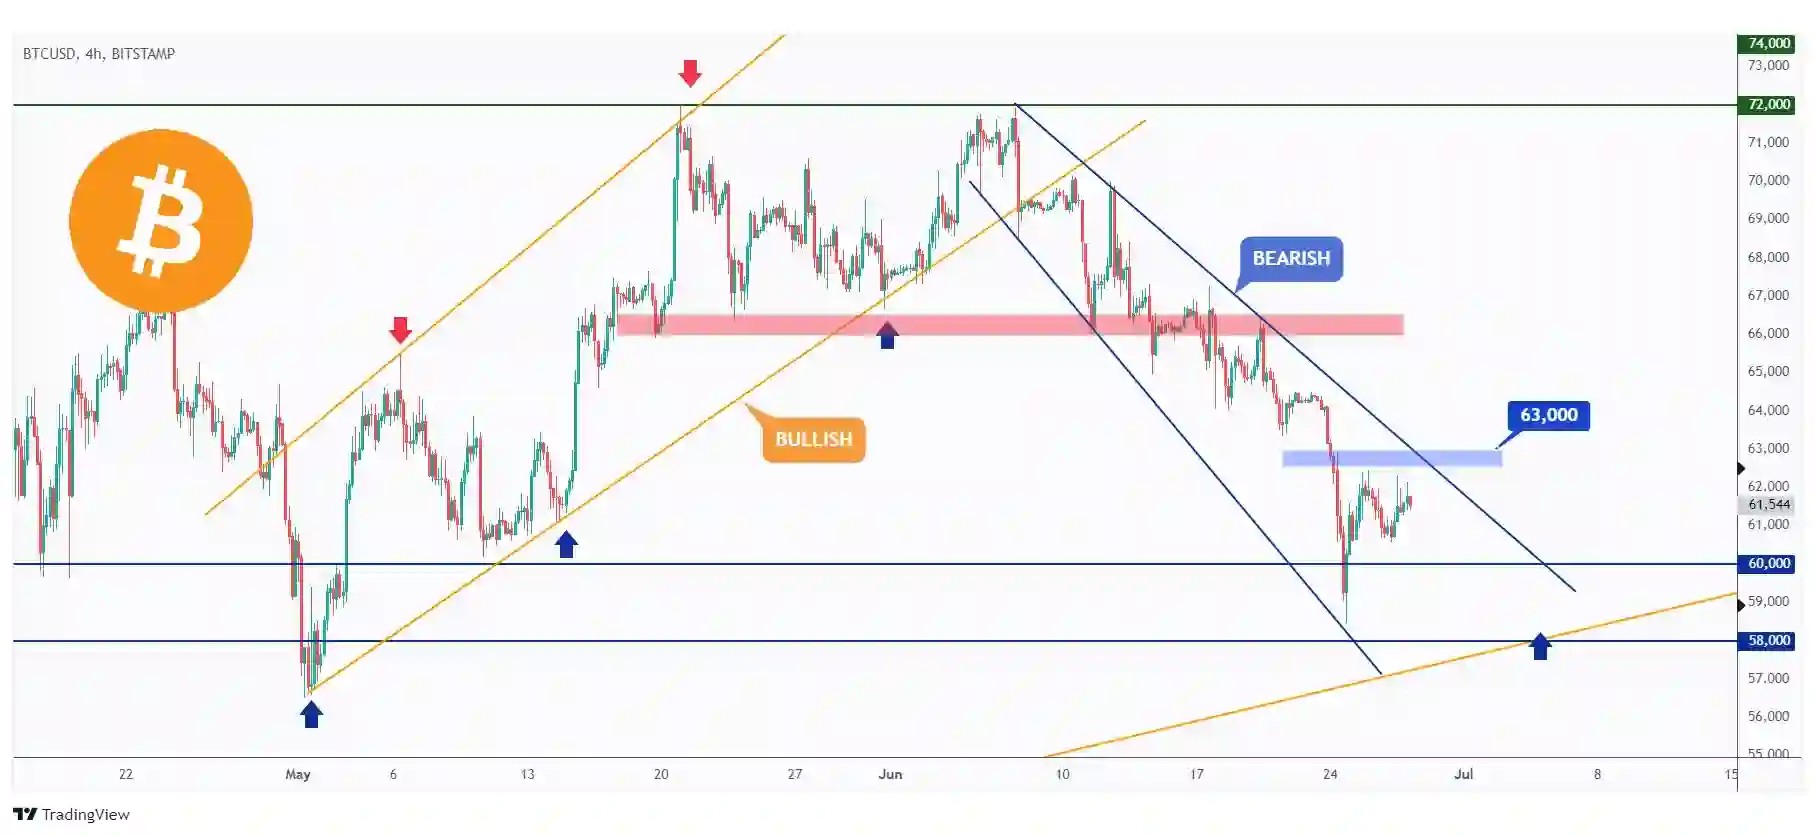 BTC 4h chart overall bearish trading within the falling wedge pattern as long as the last major high at $63,000 holds.